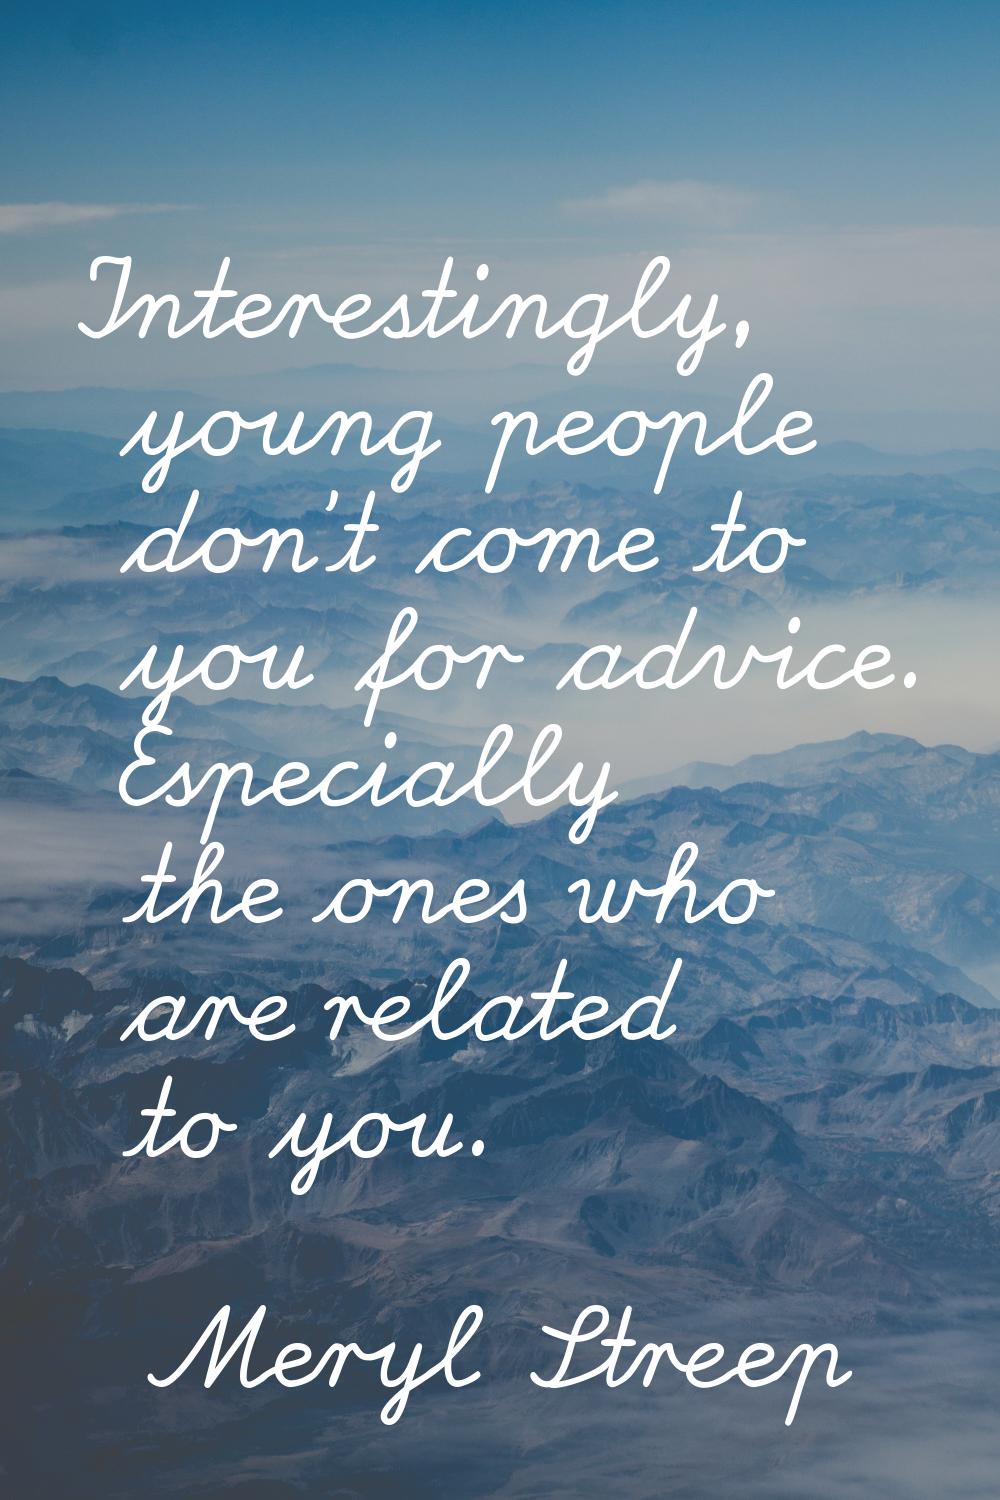 Interestingly, young people don't come to you for advice. Especially the ones who are related to yo